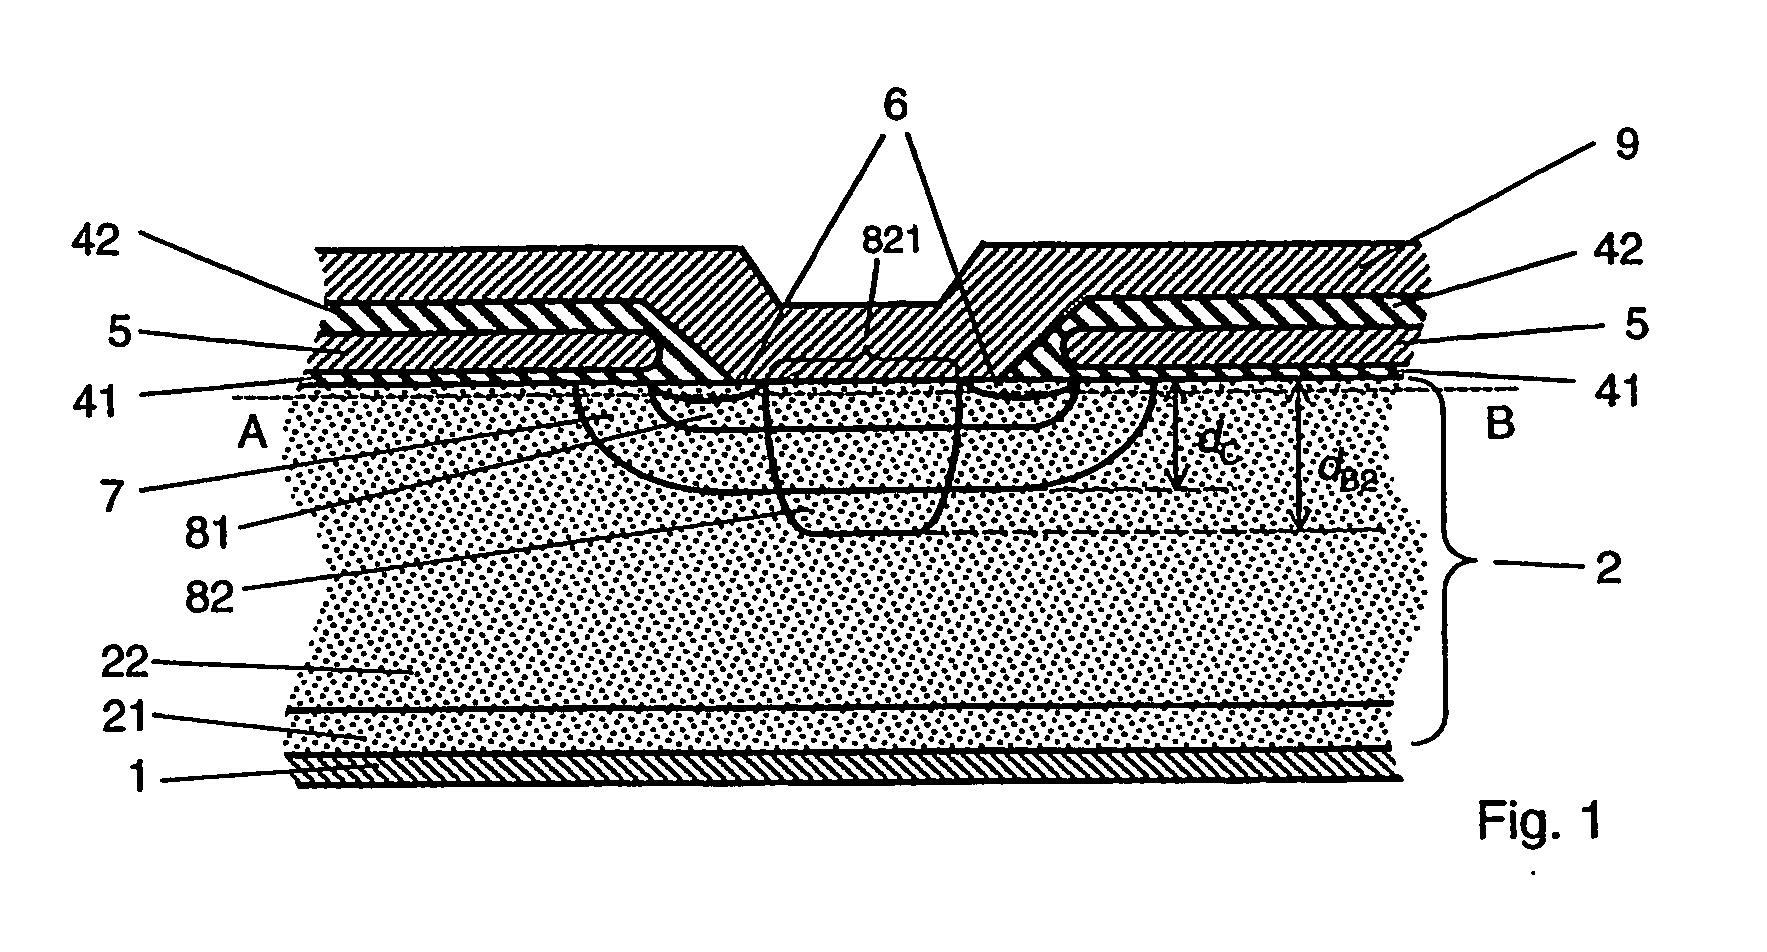 Igbt cathode design with improved safe operating area capability